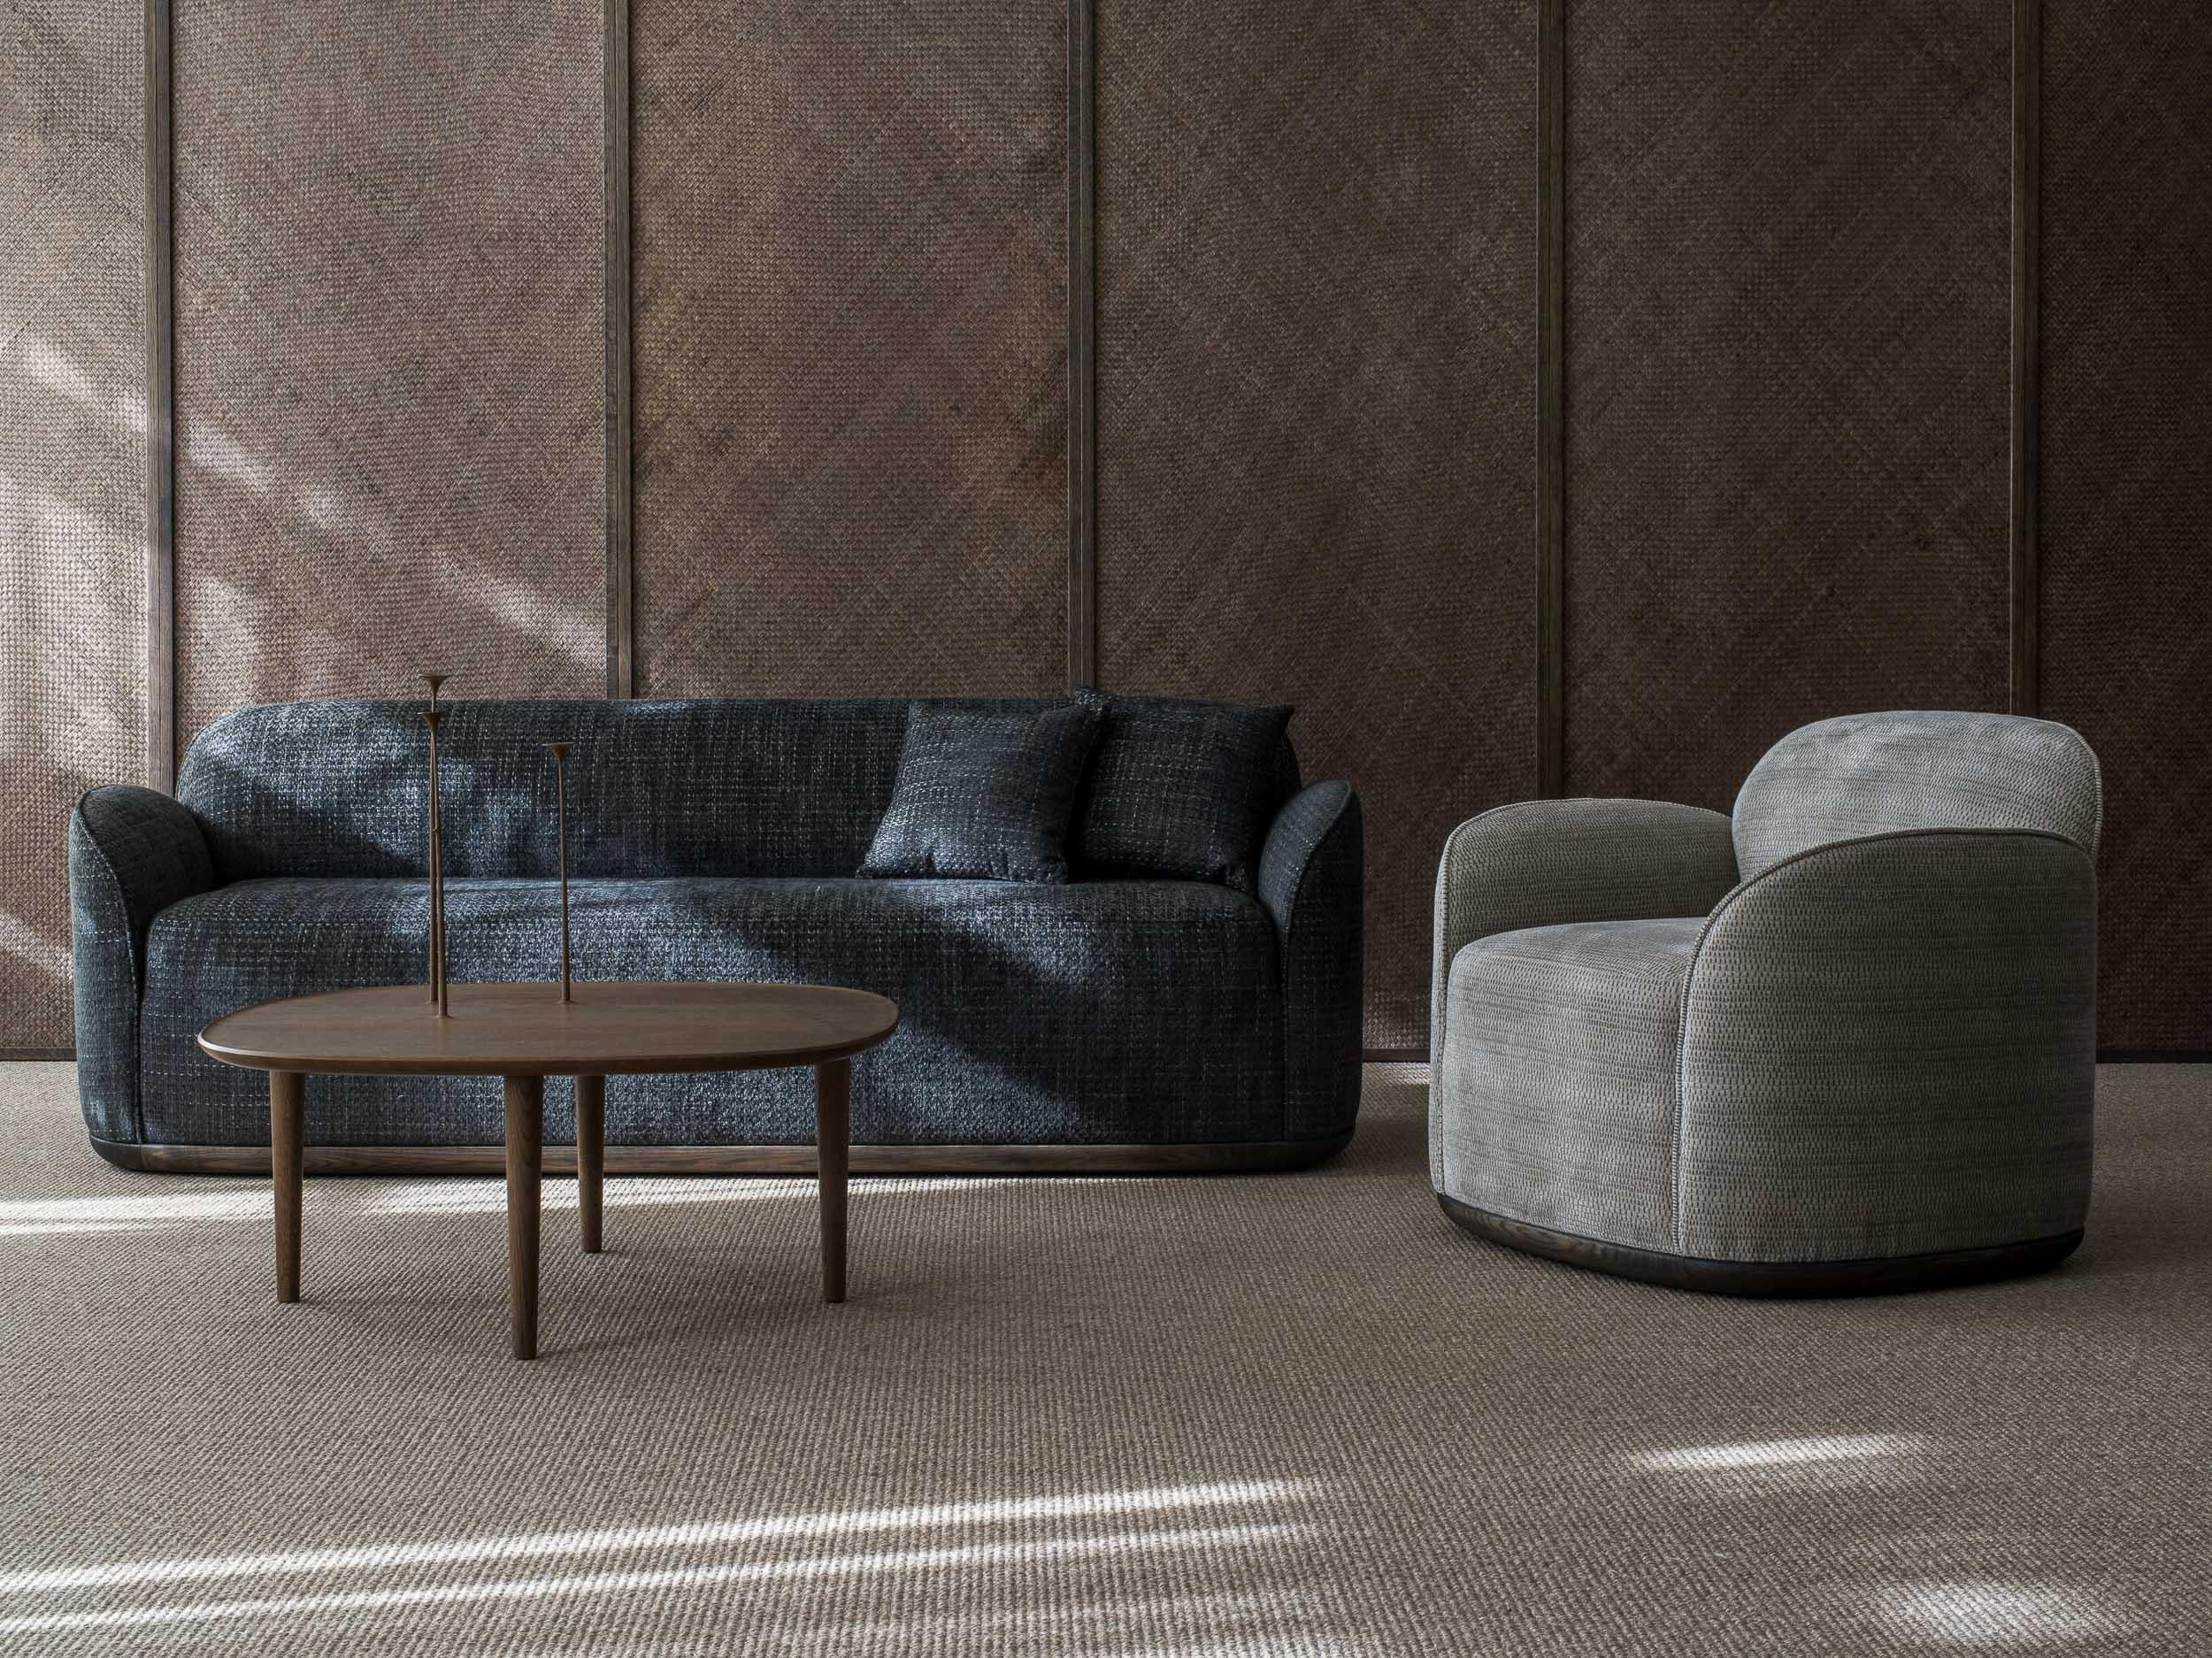 Unio Loveseat by Poiat 
Designers: Timo Mikkonen & Antti Rouhunkoski 

Collection UNIO 2021

Dimensions: H. 72 x W. 150 D. 72 SH. 40
Model shown: Cat 3. Hanoi 04 - Pierre Frey
 
The Unio Collection, featuring an armchair and sofas, opens a